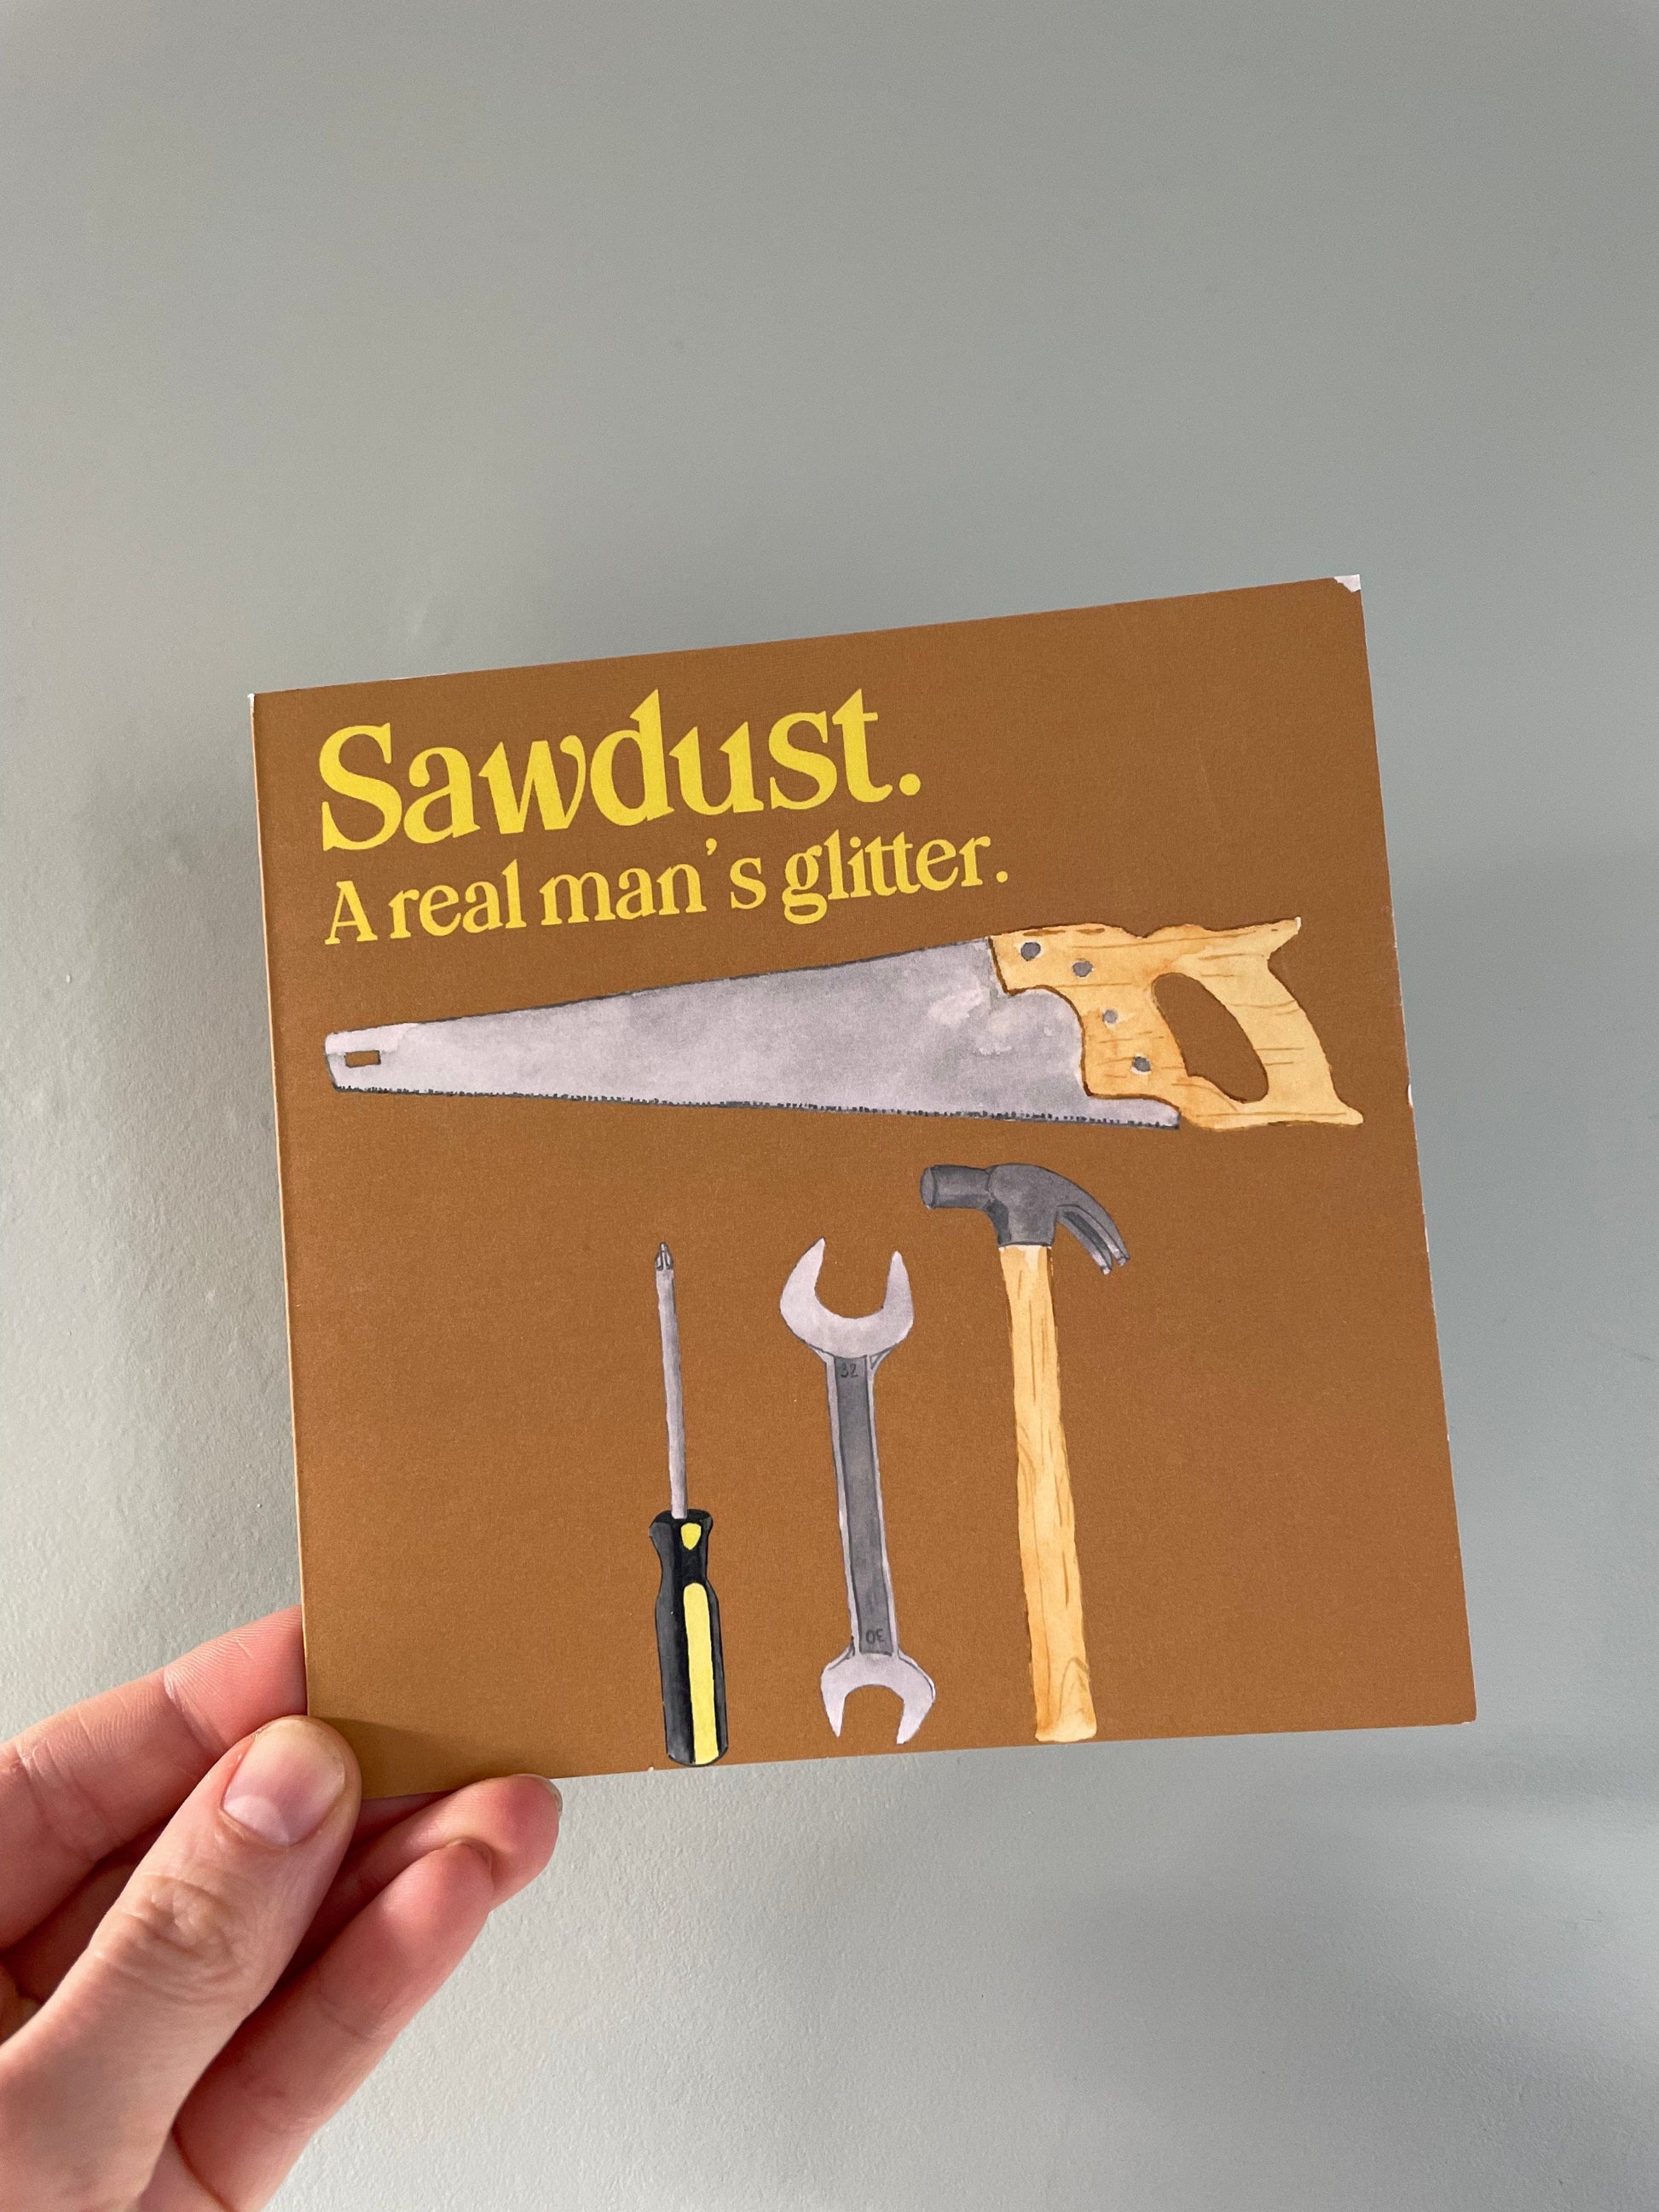 And Hope Designs SECONDS - Sawdust. A real man’s glitter card